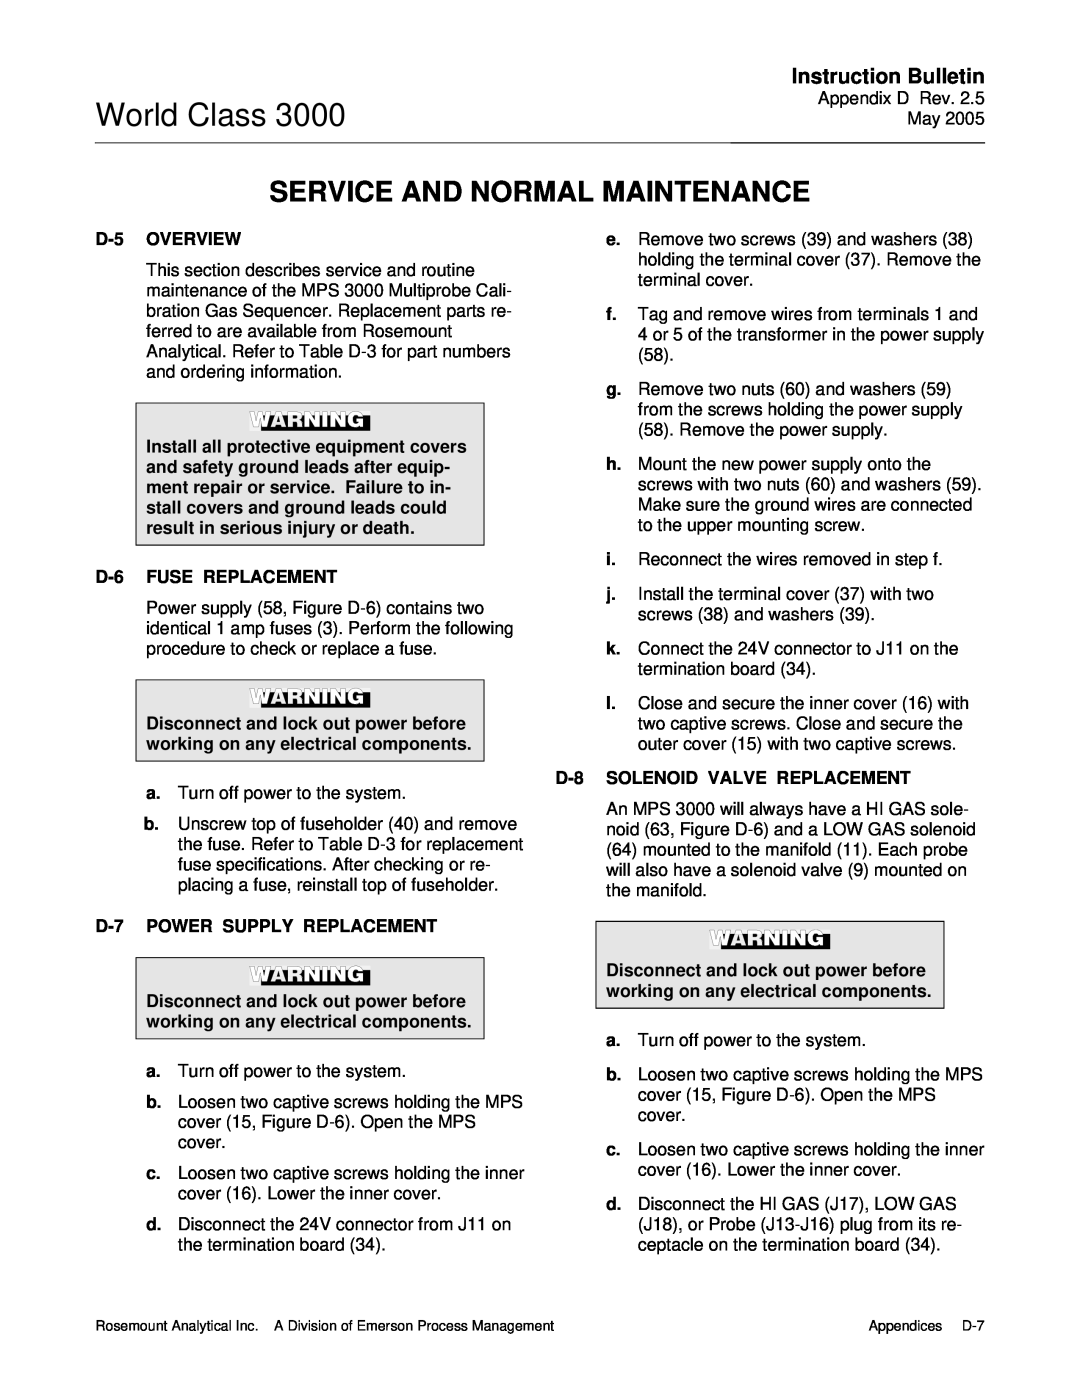 Emerson 3000 World Class, Service And Normal Maintenance, Instruction Bulletin, D-5OVERVIEW, D-6FUSE REPLACEMENT 